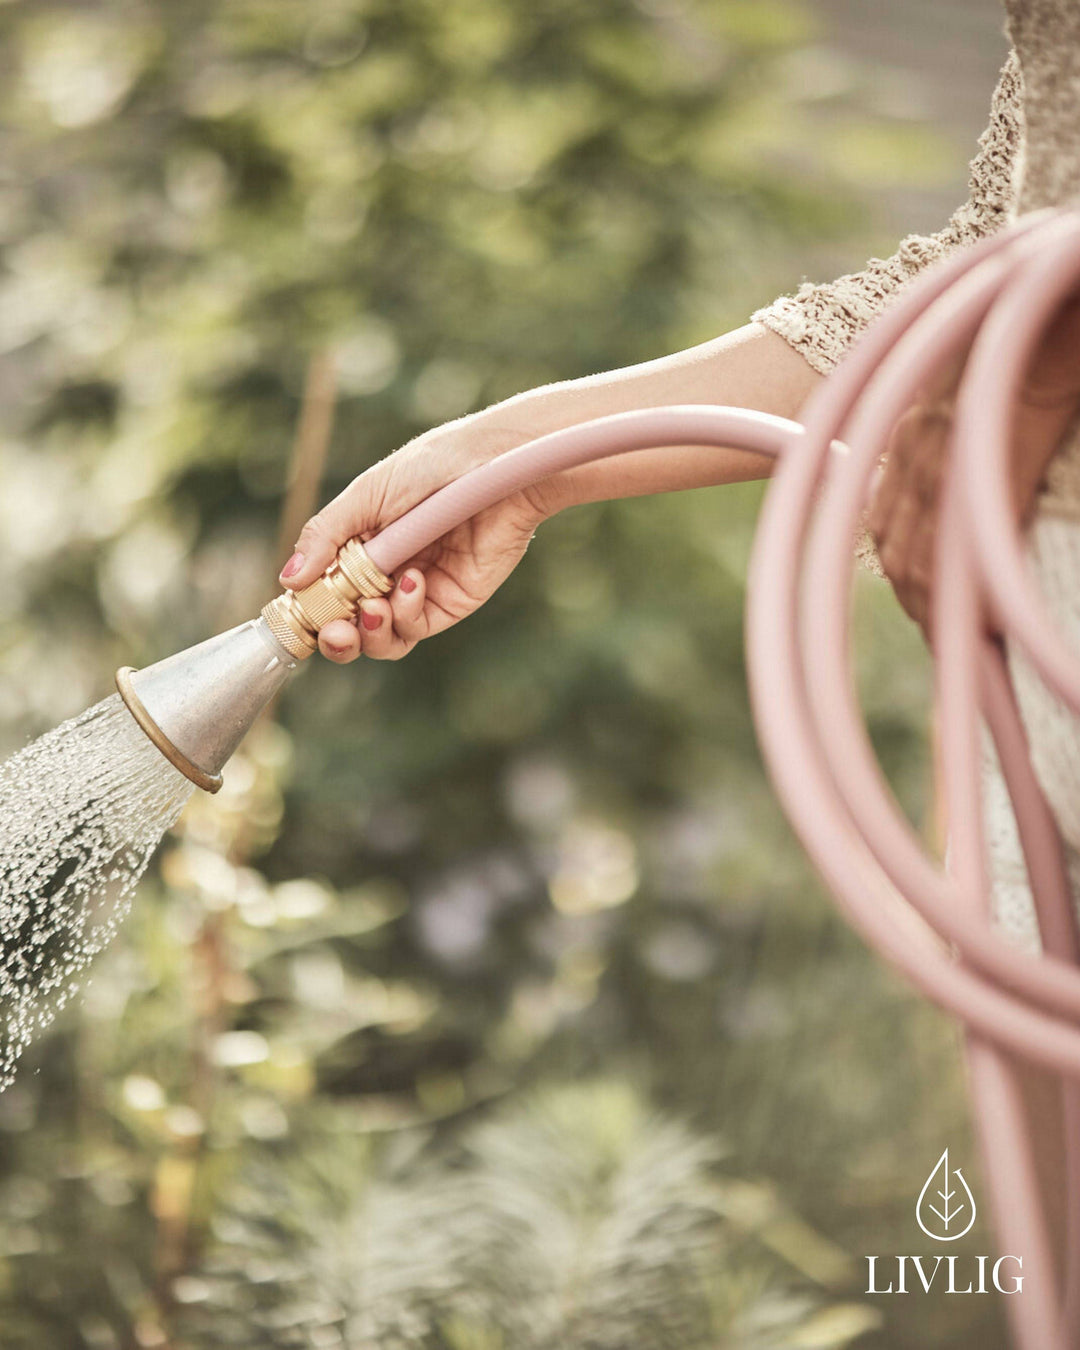 a woman is holding a hose and spraying water